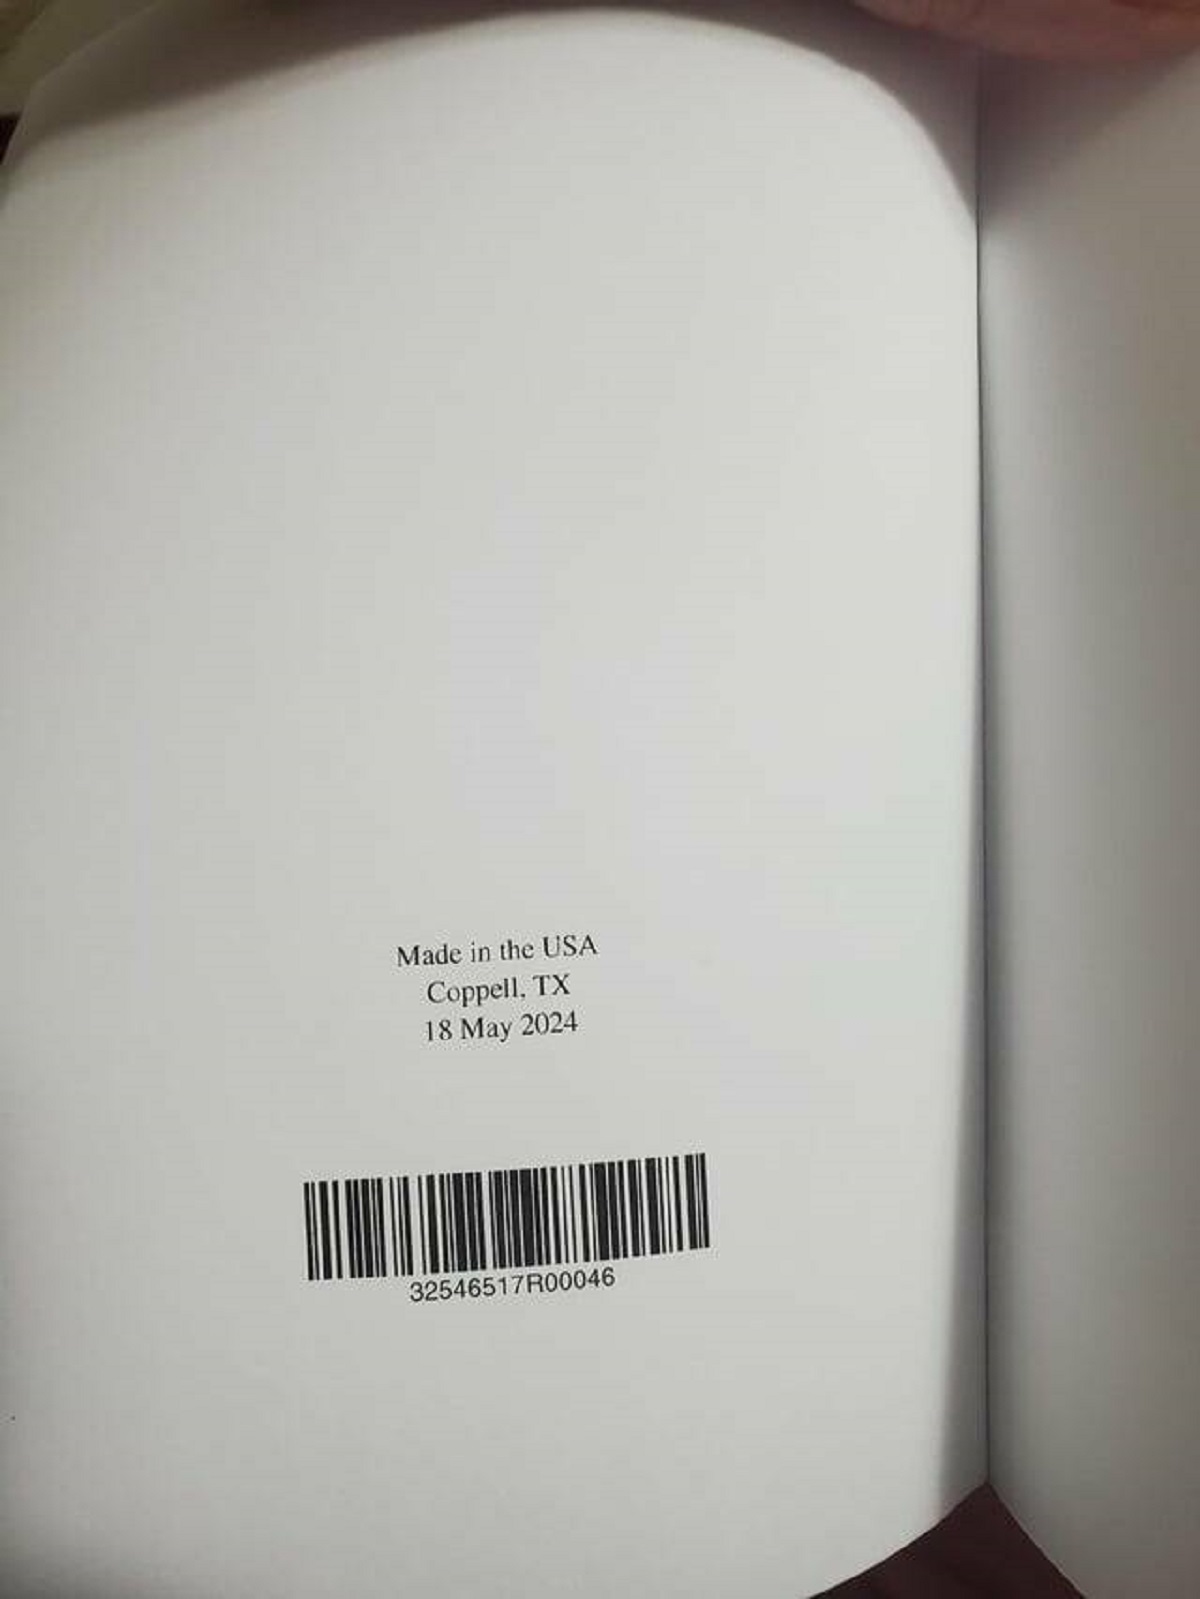 "This book I ordered 2 days ago on Amazon was printed 2 days ago."